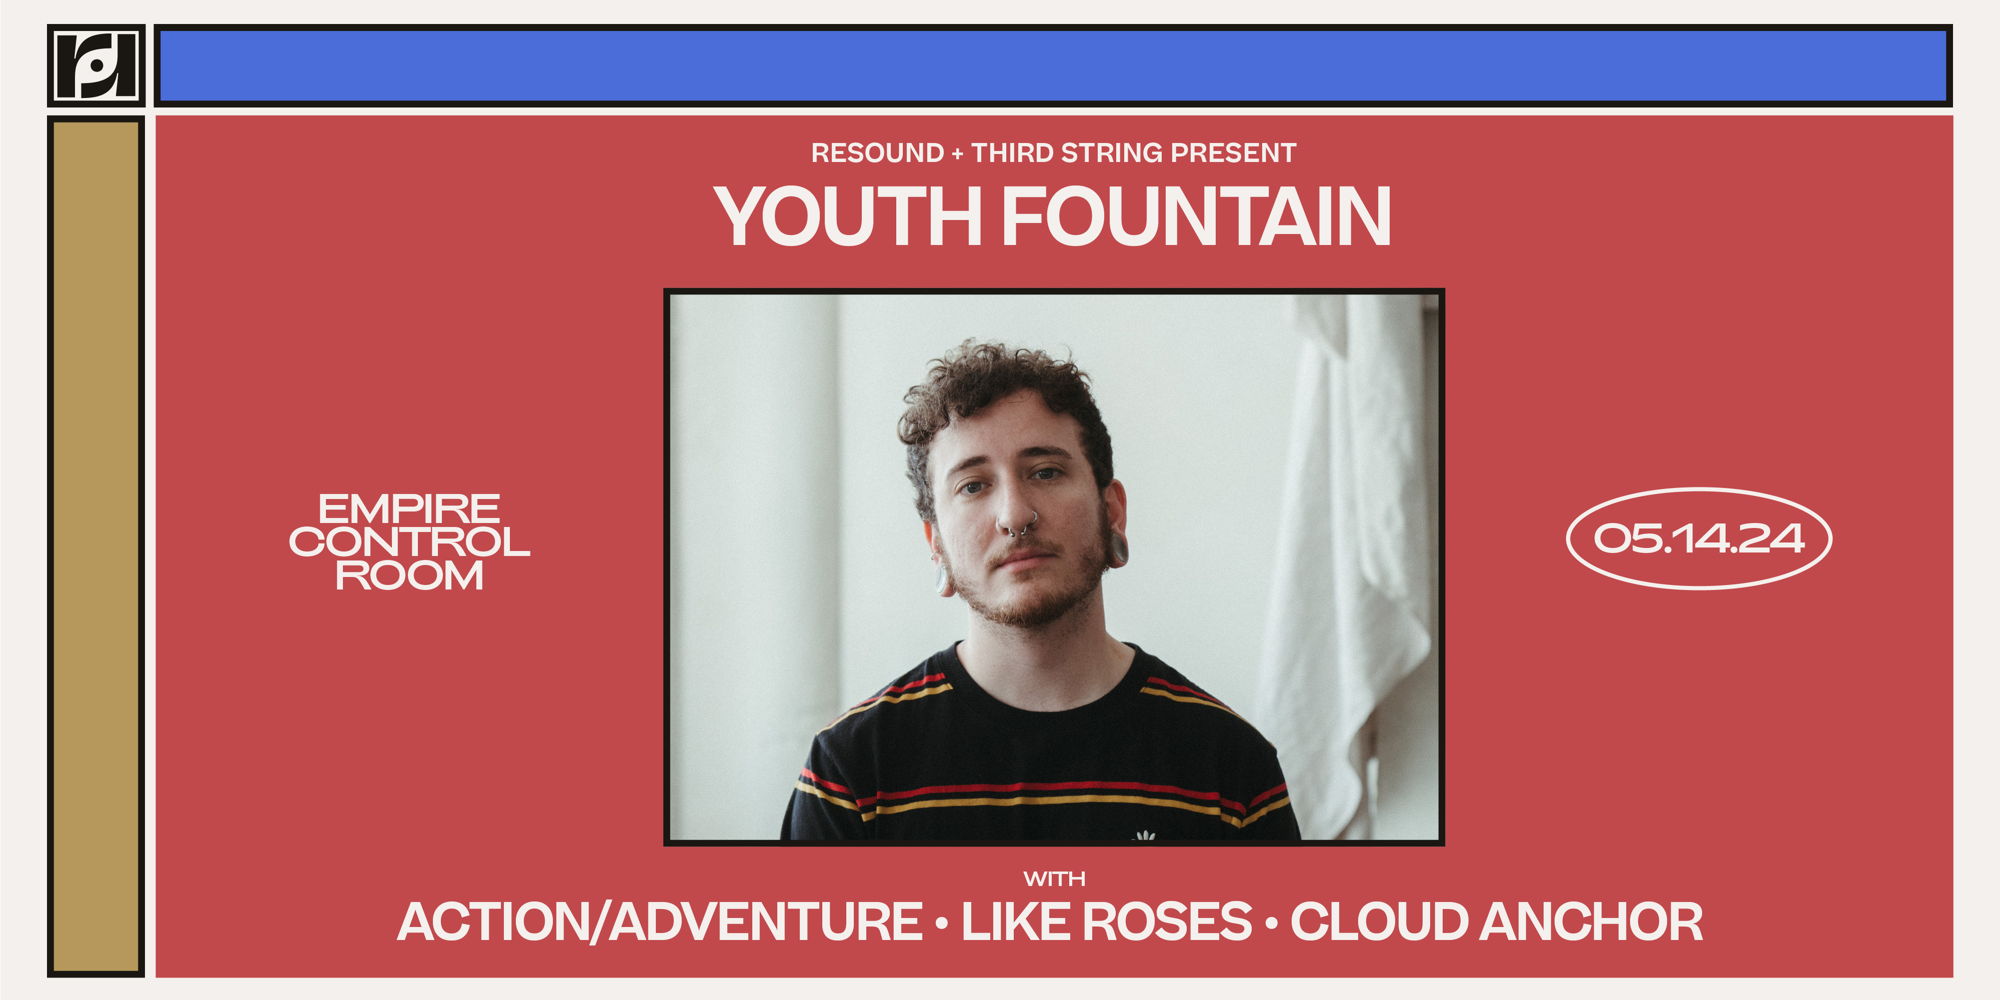 Resound + Third String Present: Youth Fountain w/ Action/Adventure, Like Roses, & Cloud Anchor at Empire Control Room  promotional image